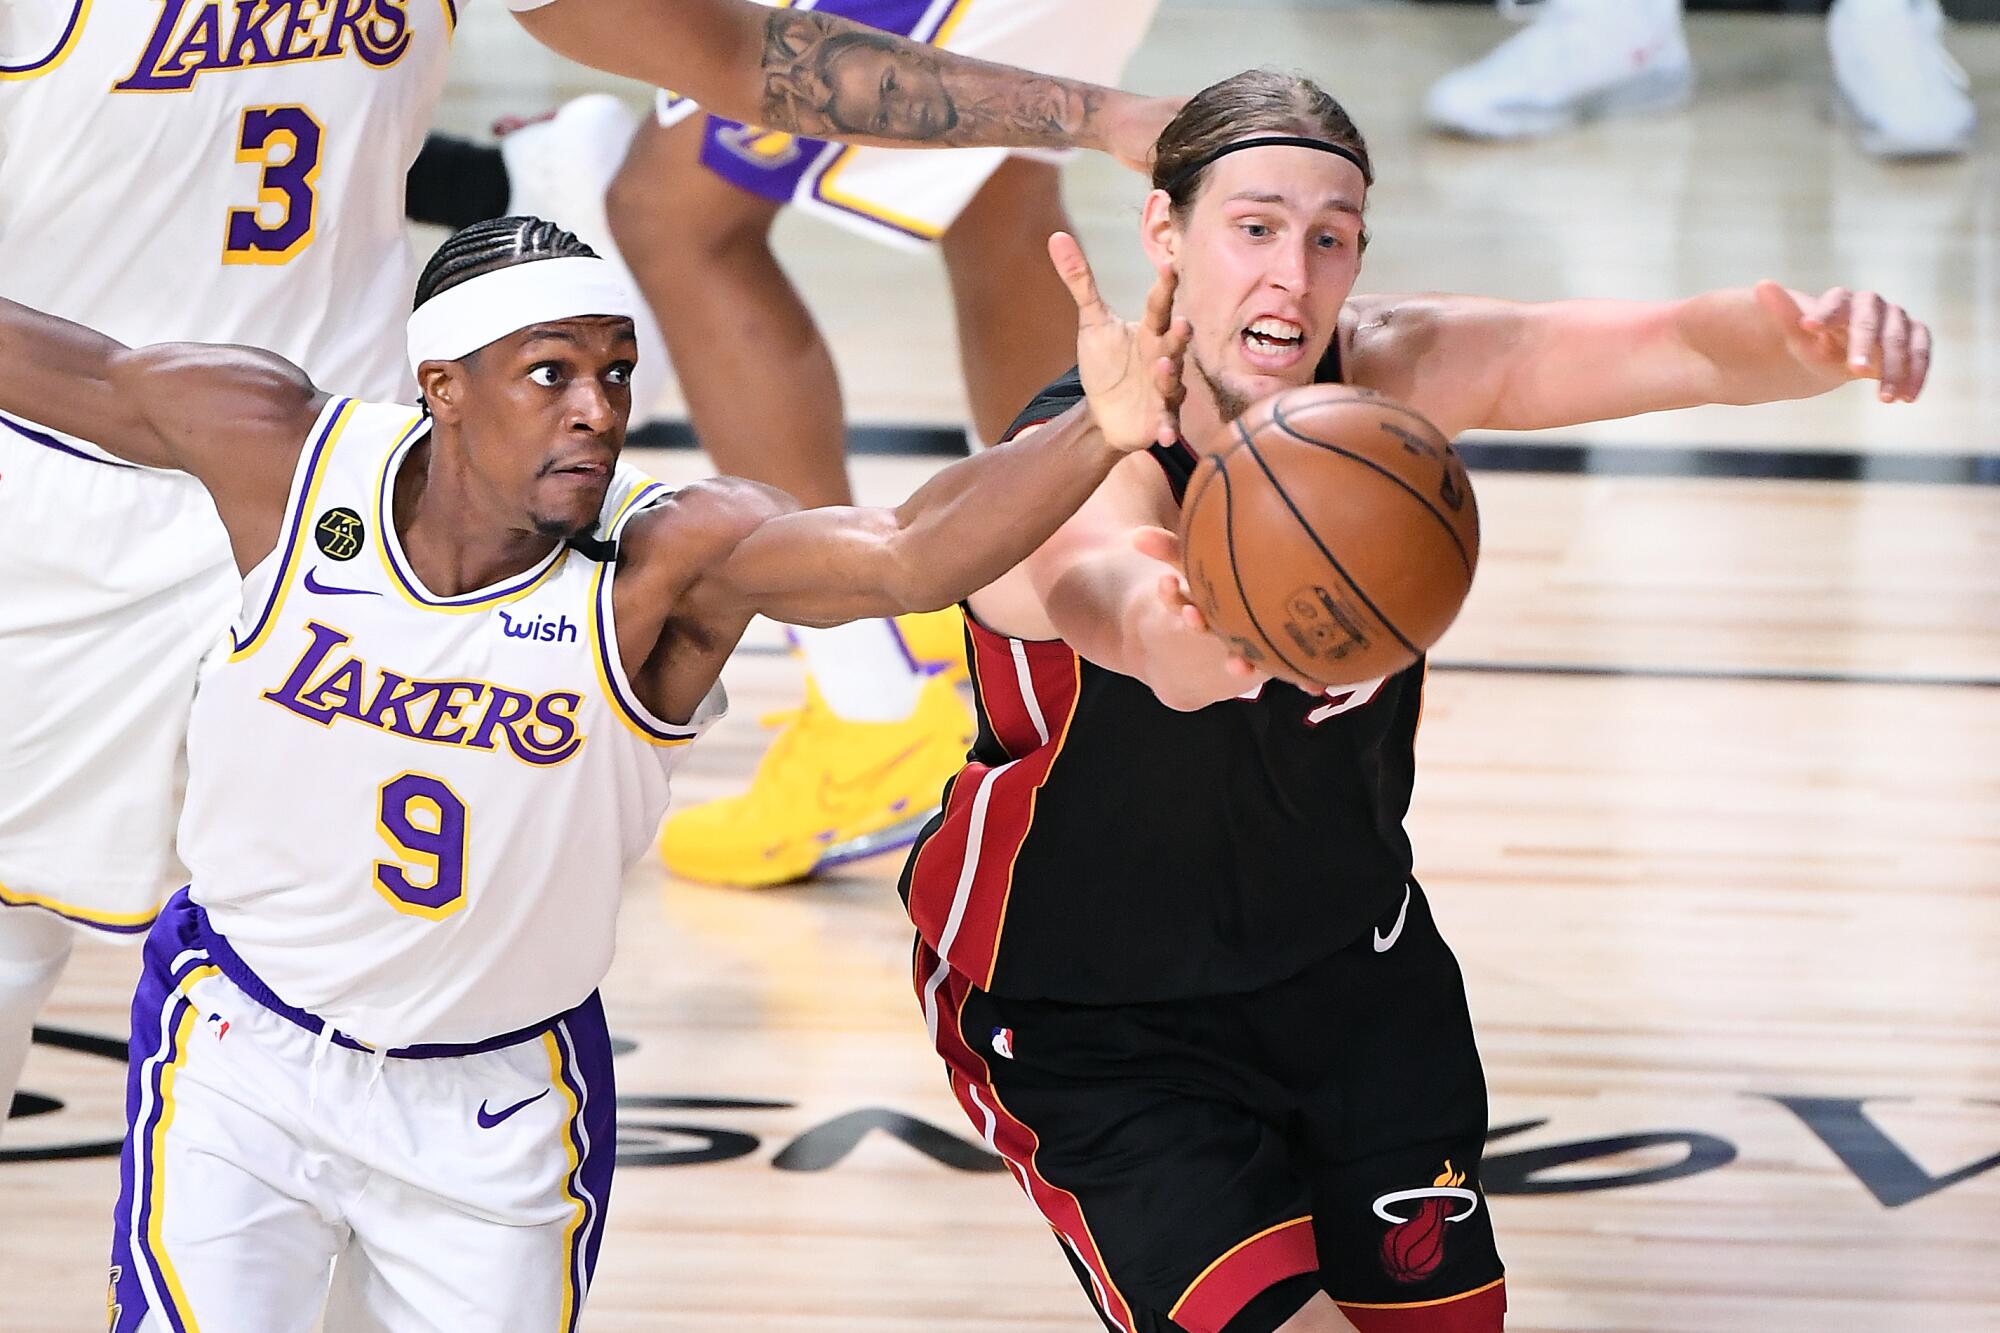 Lakers guard Rajon Rondo and Heat center Kelly Olynyk chase after a loose ball during Game 3 on Sunday night.